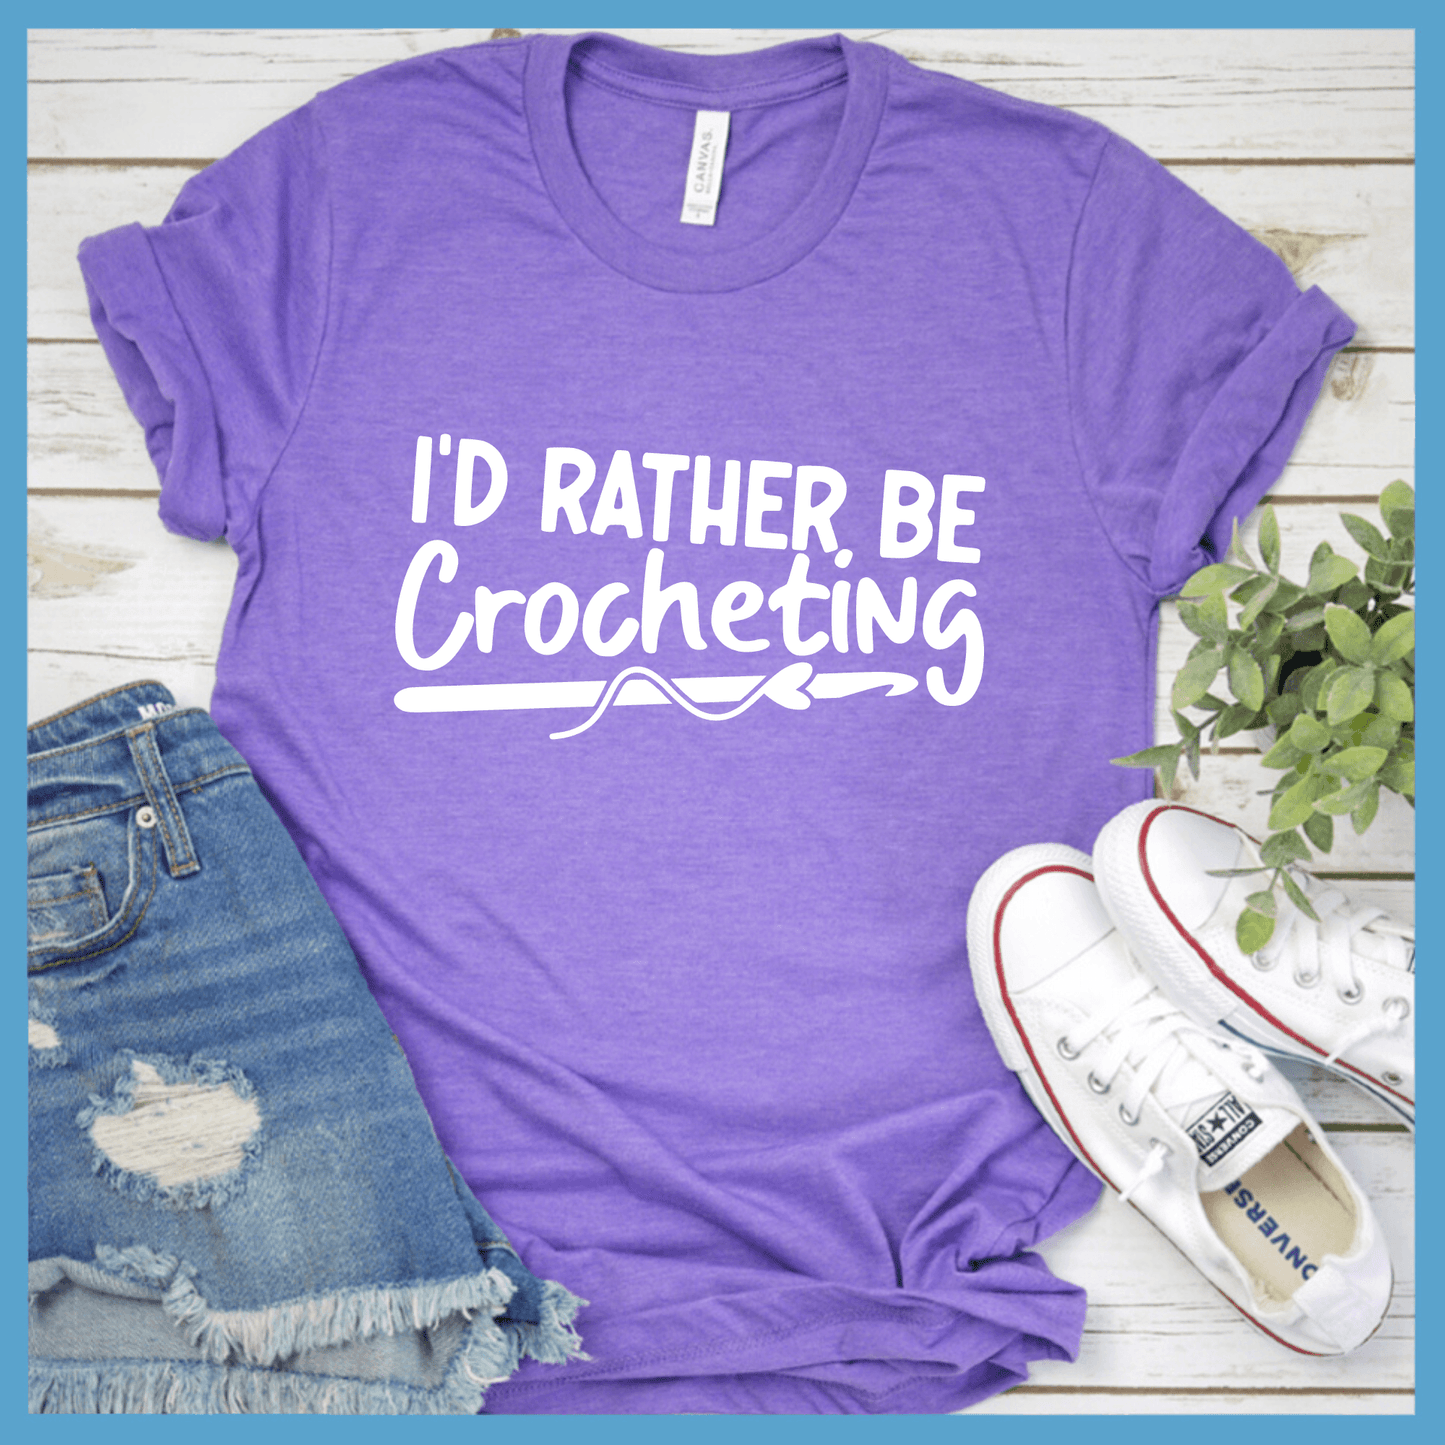 I'd Rather Be Crocheting T-Shirt